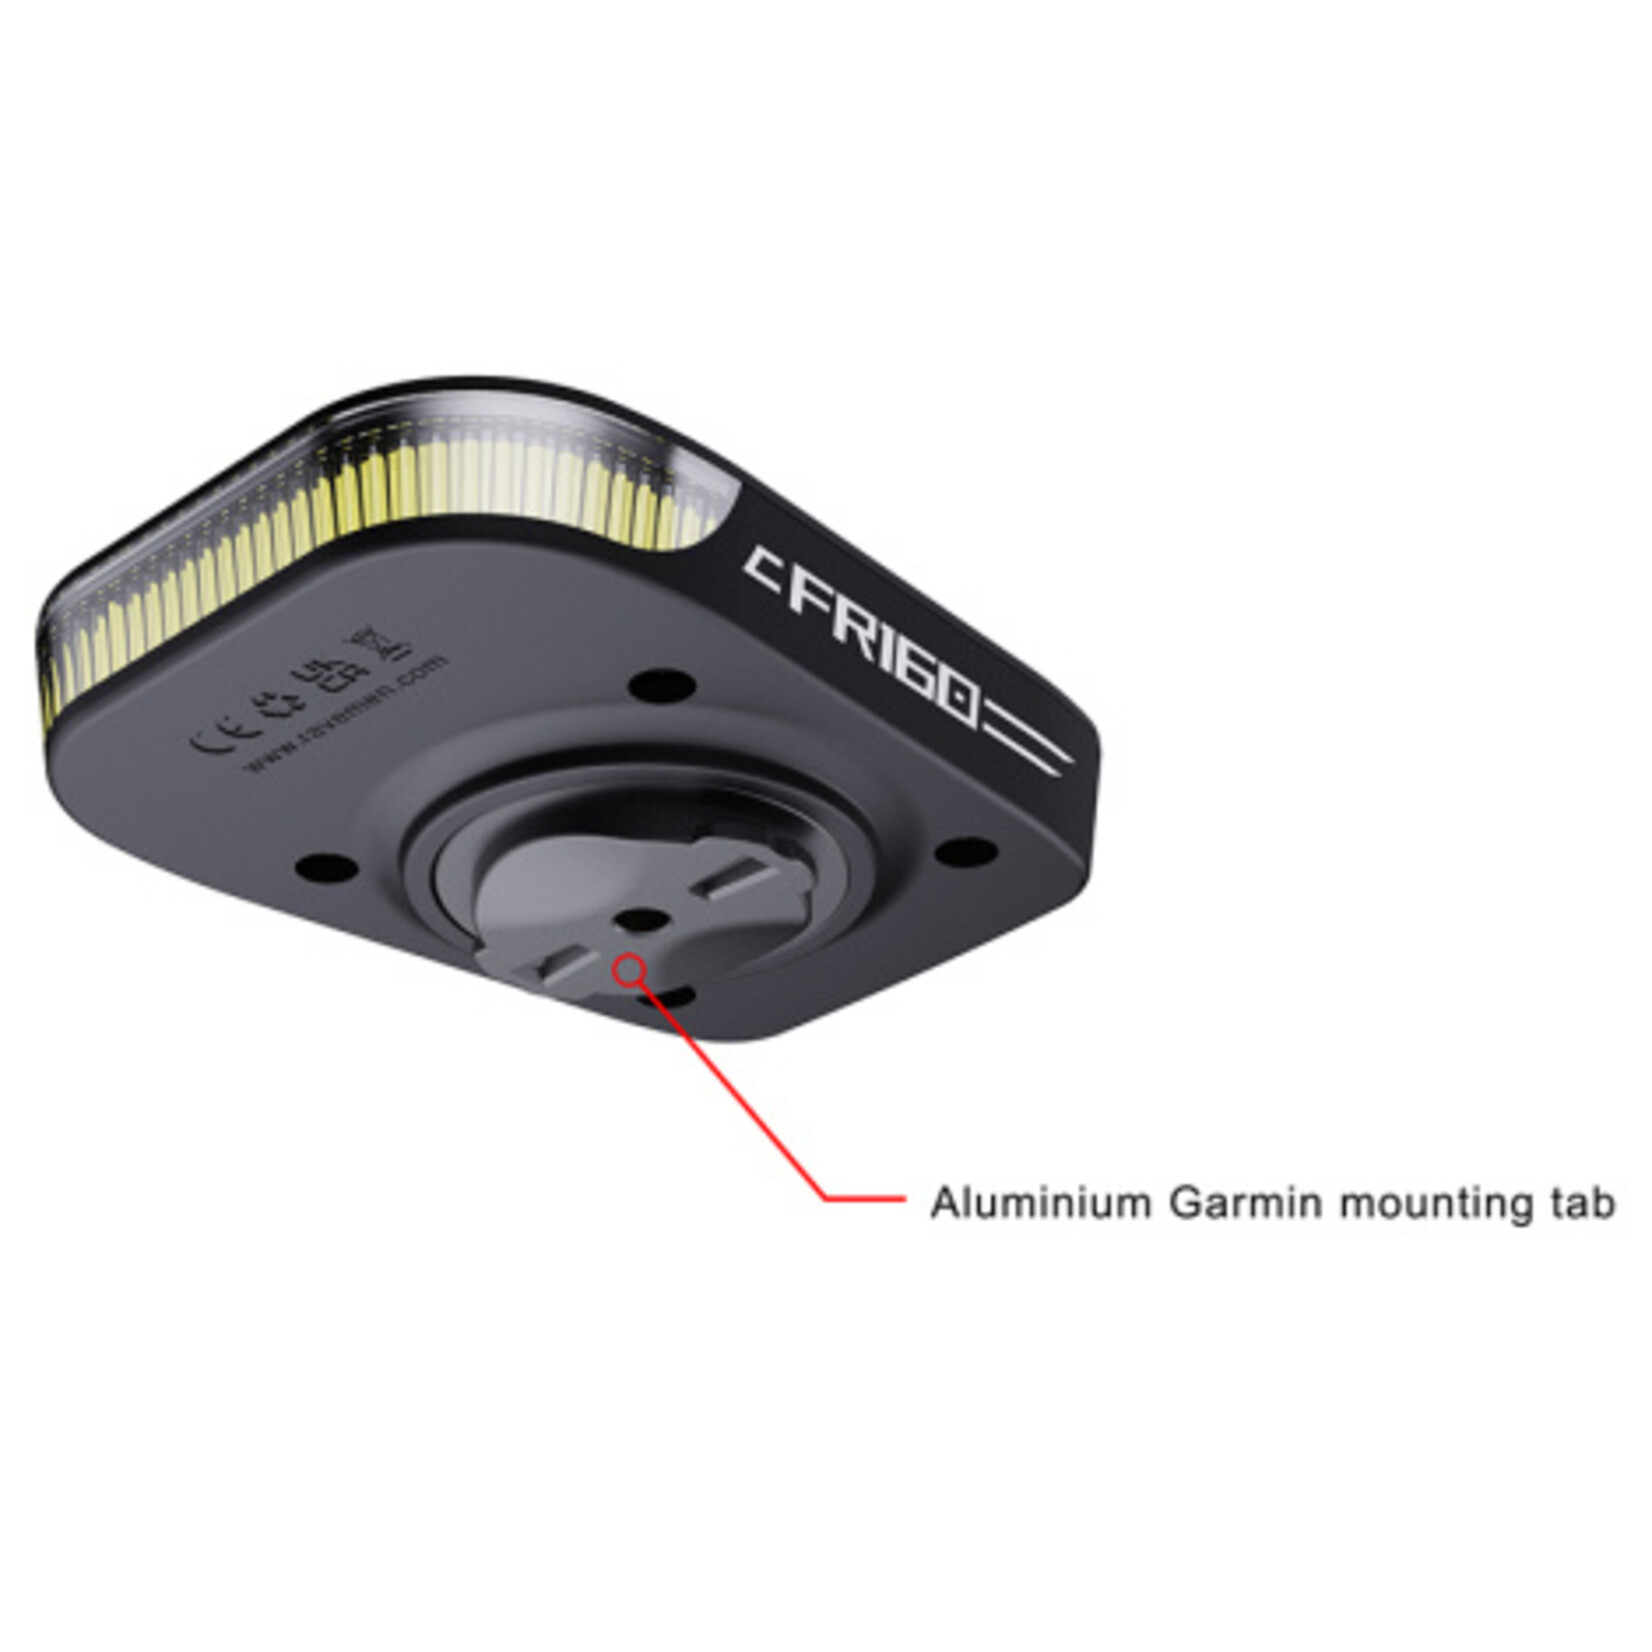 Ravemen Ravemen FR160 USB Rechargeable Out-Front Front Light in Black (160 Lumens) - Compatible with Garmin/Wahoo Mounts)